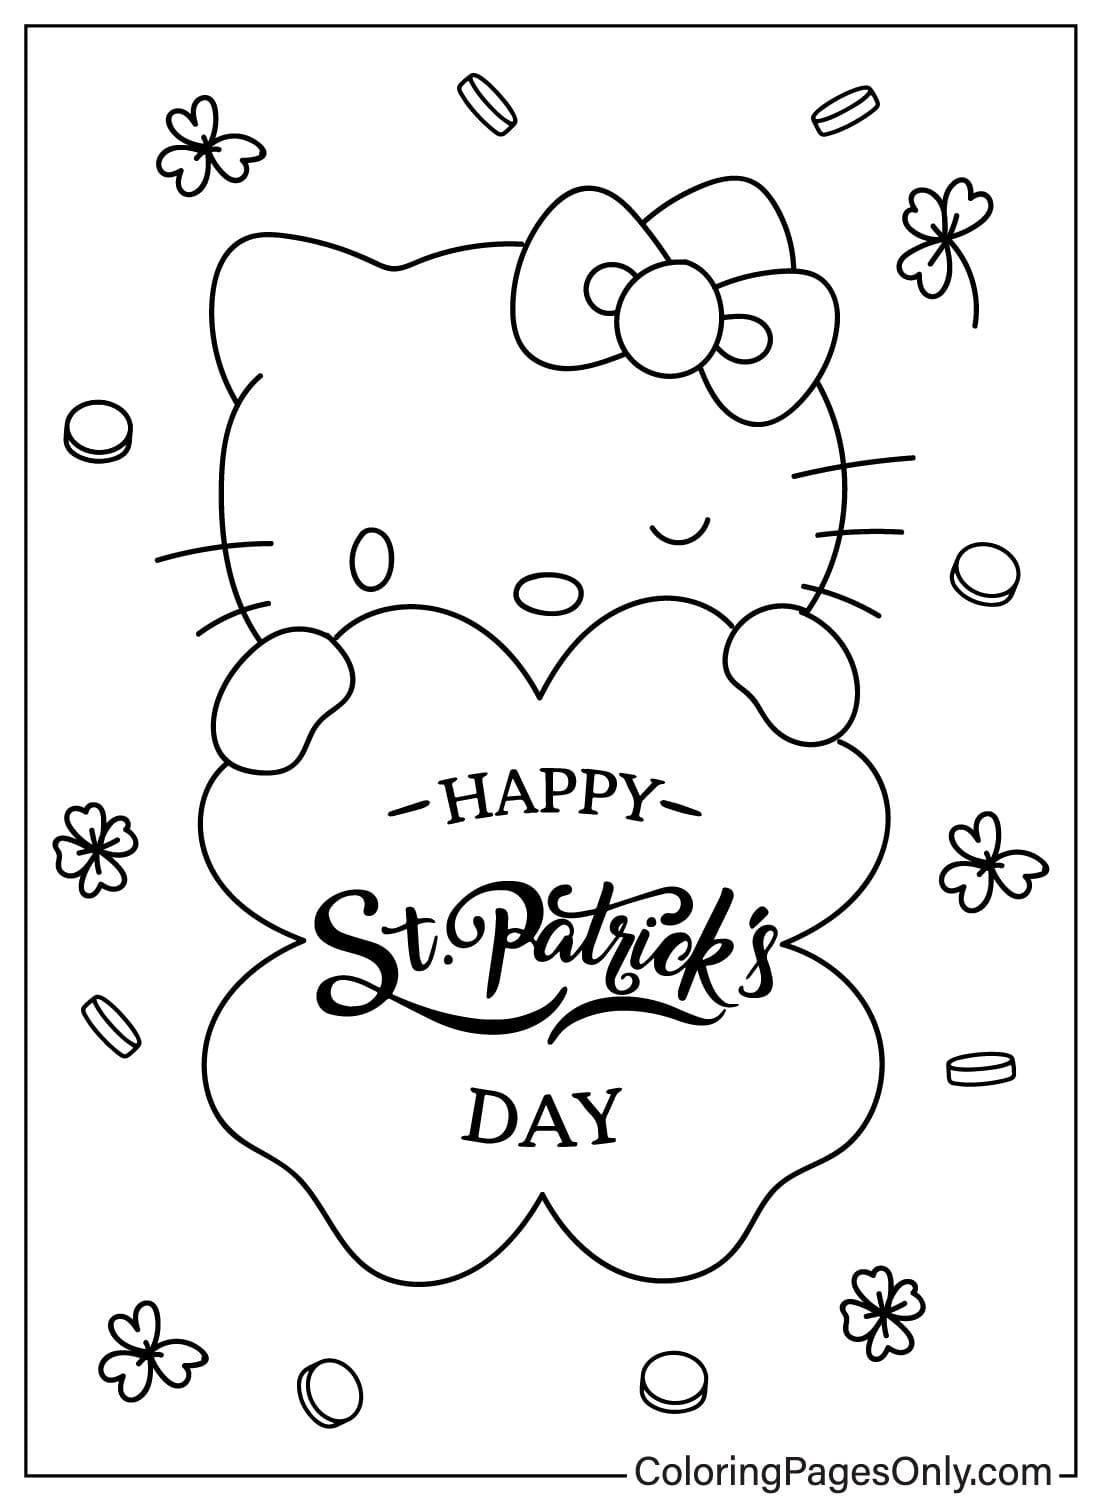 Hello Kitty Happy St. Patrick’s Day Coloring Page